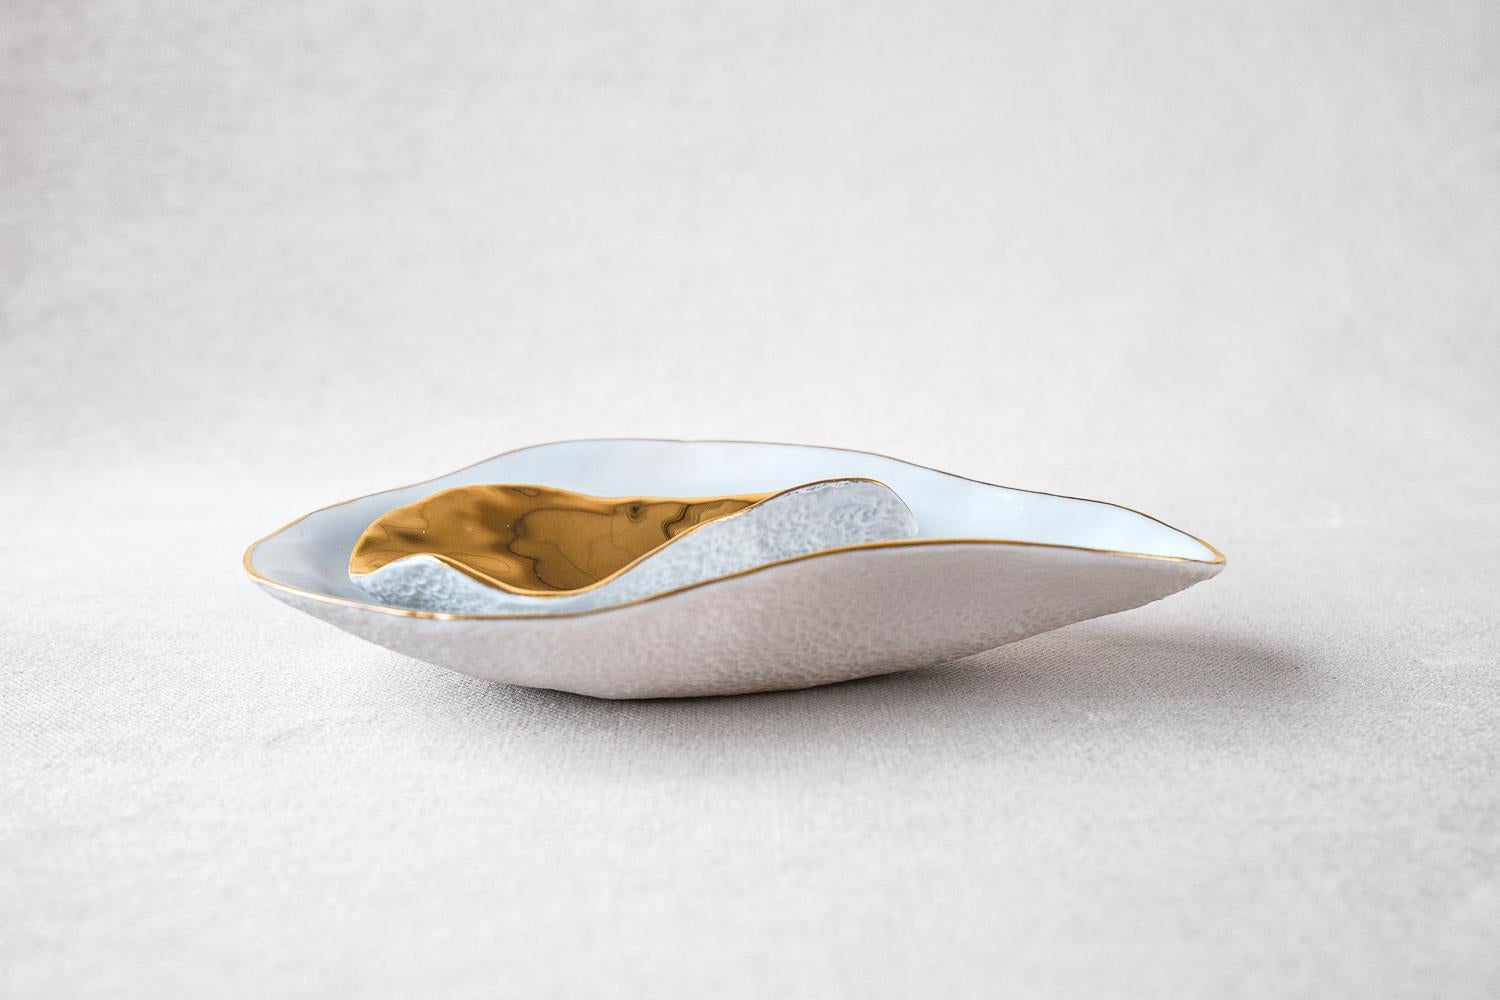 • set of 2 small porcelain side dishes that complement each other
• measures 16cm x 8,5cm x 3cm and 9,5cm x 6cm x 3cm 
• perfect for a sexy amuse-bouche, a pre-dessert or side dish
• for that sexy dinner party
• golden spoon with a very